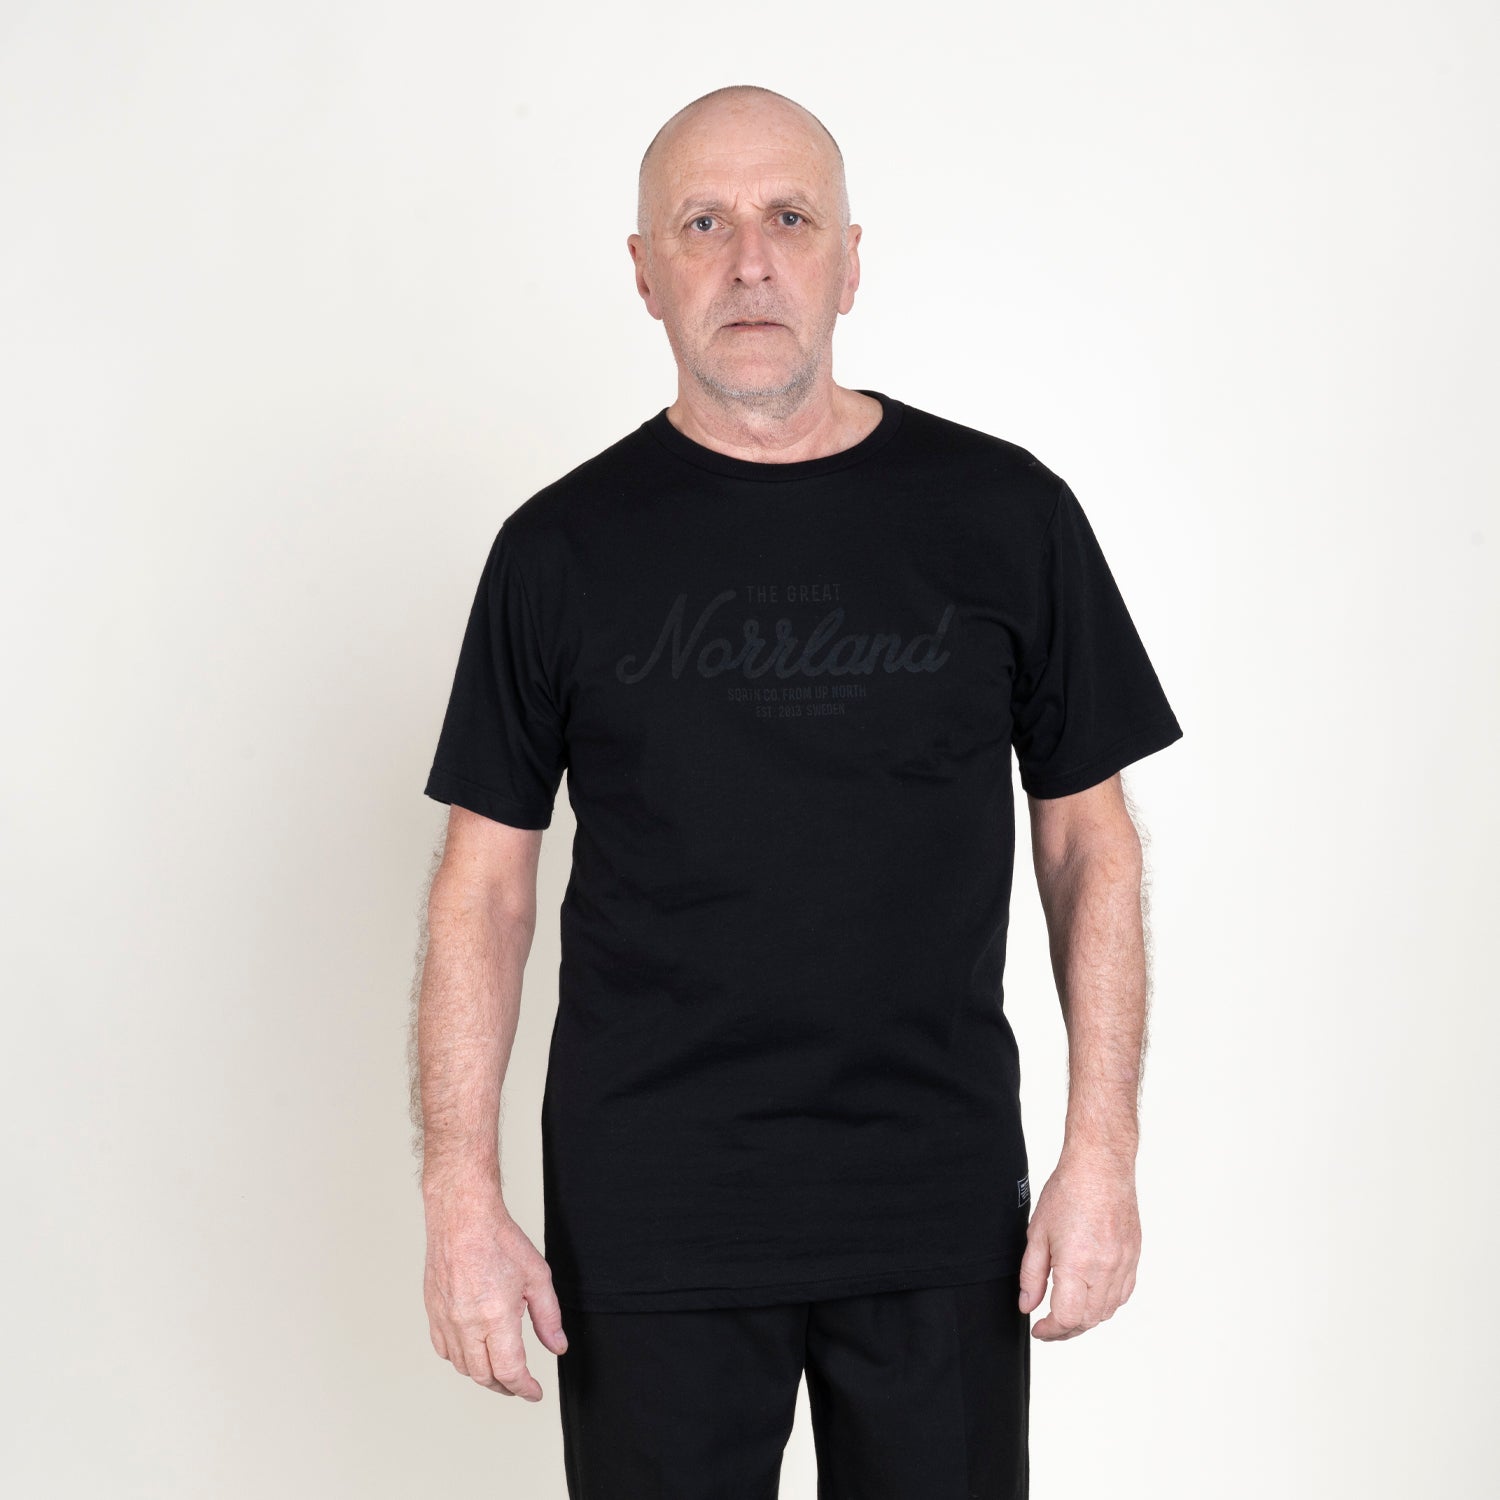 GREAT NORRLAND T-SHIRT - ALL BLACK